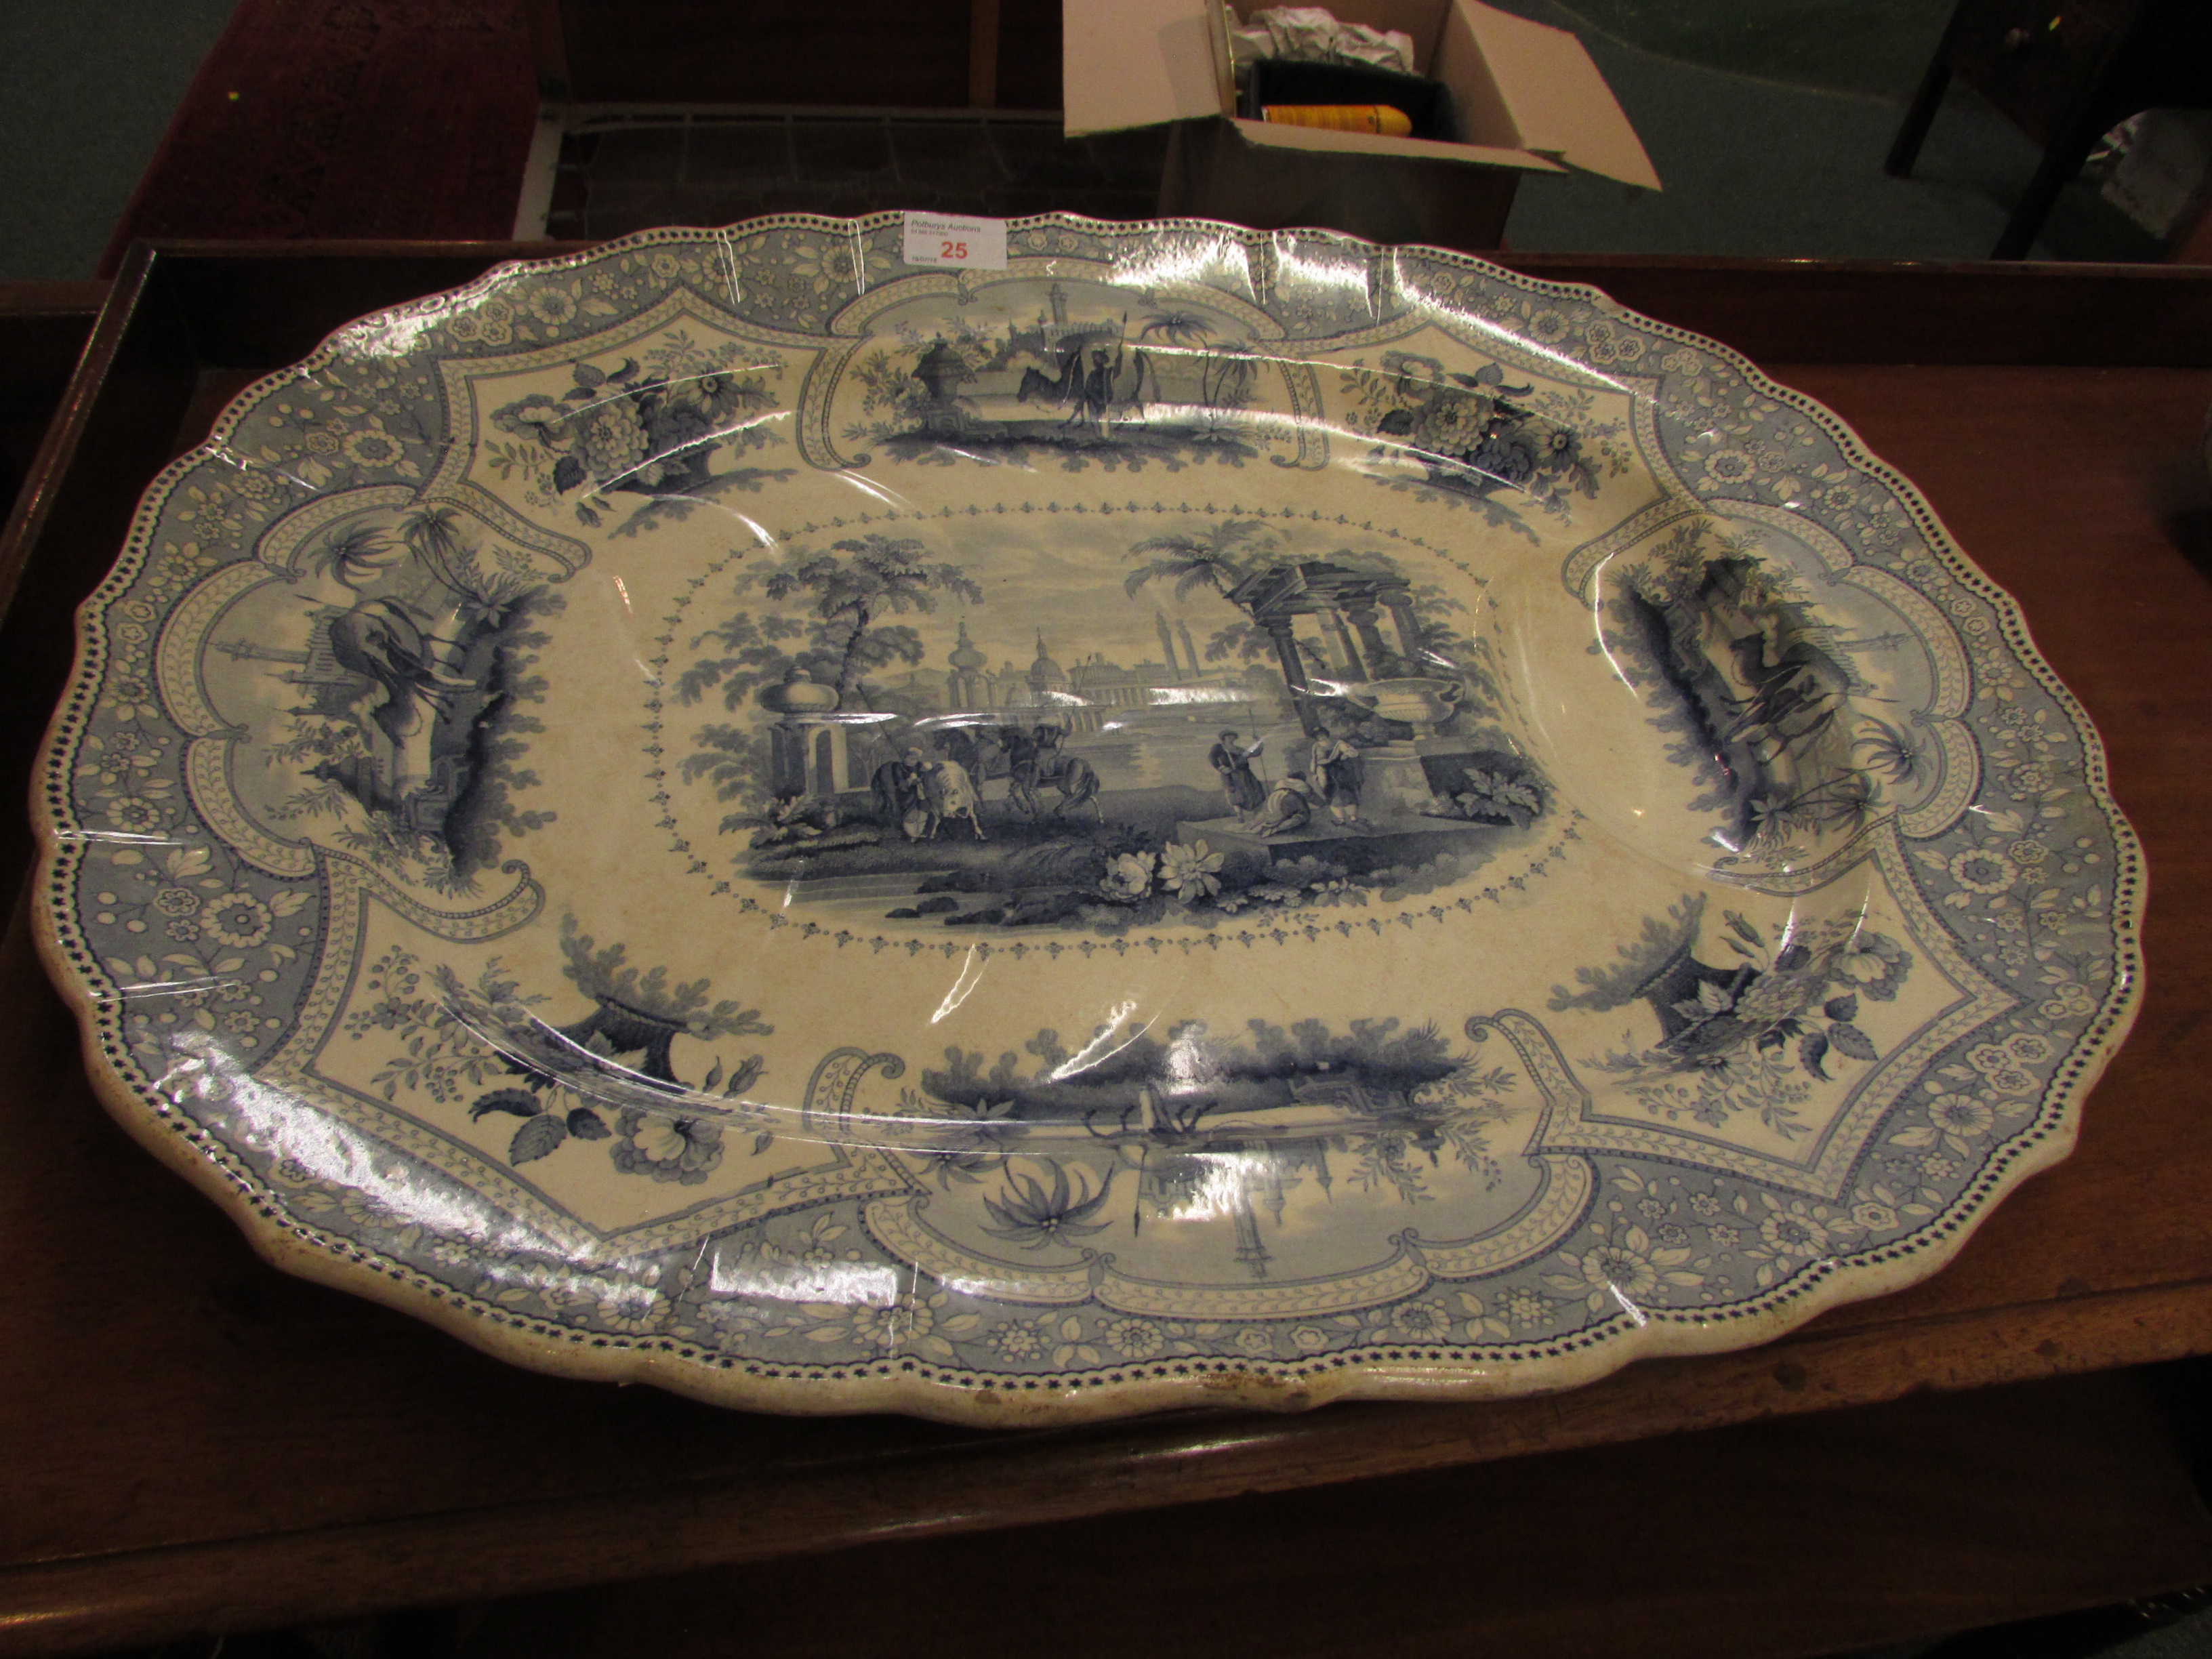 A large pottery meat or turkey plate, 19th century and transfer decorated in blue on white, the base